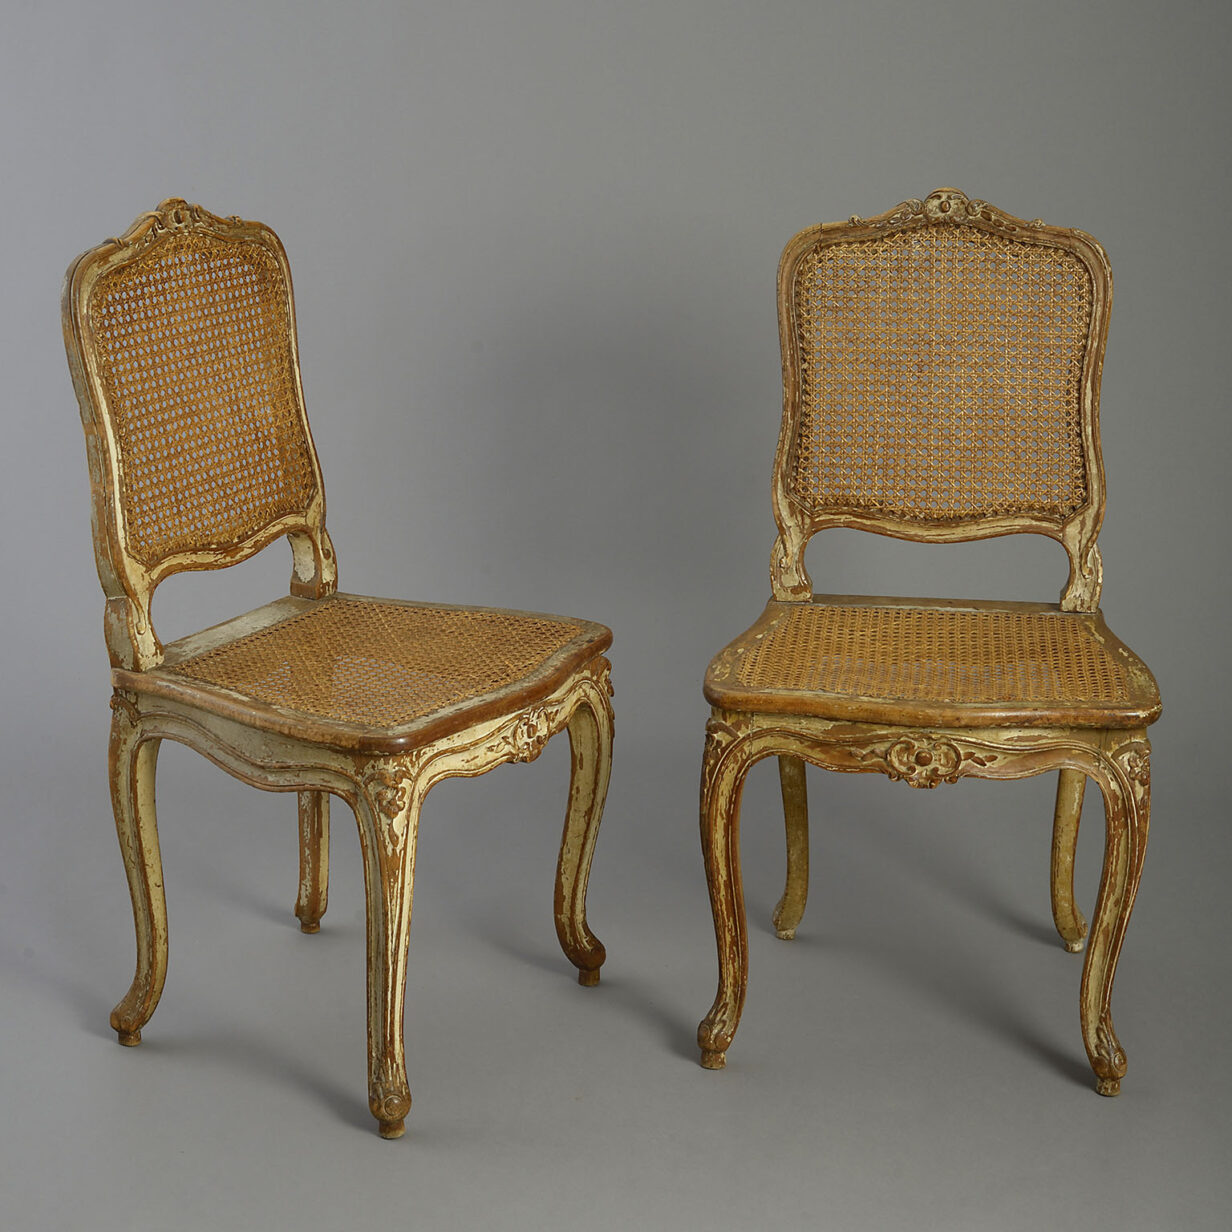 Pair of louis xvi painted side chairs